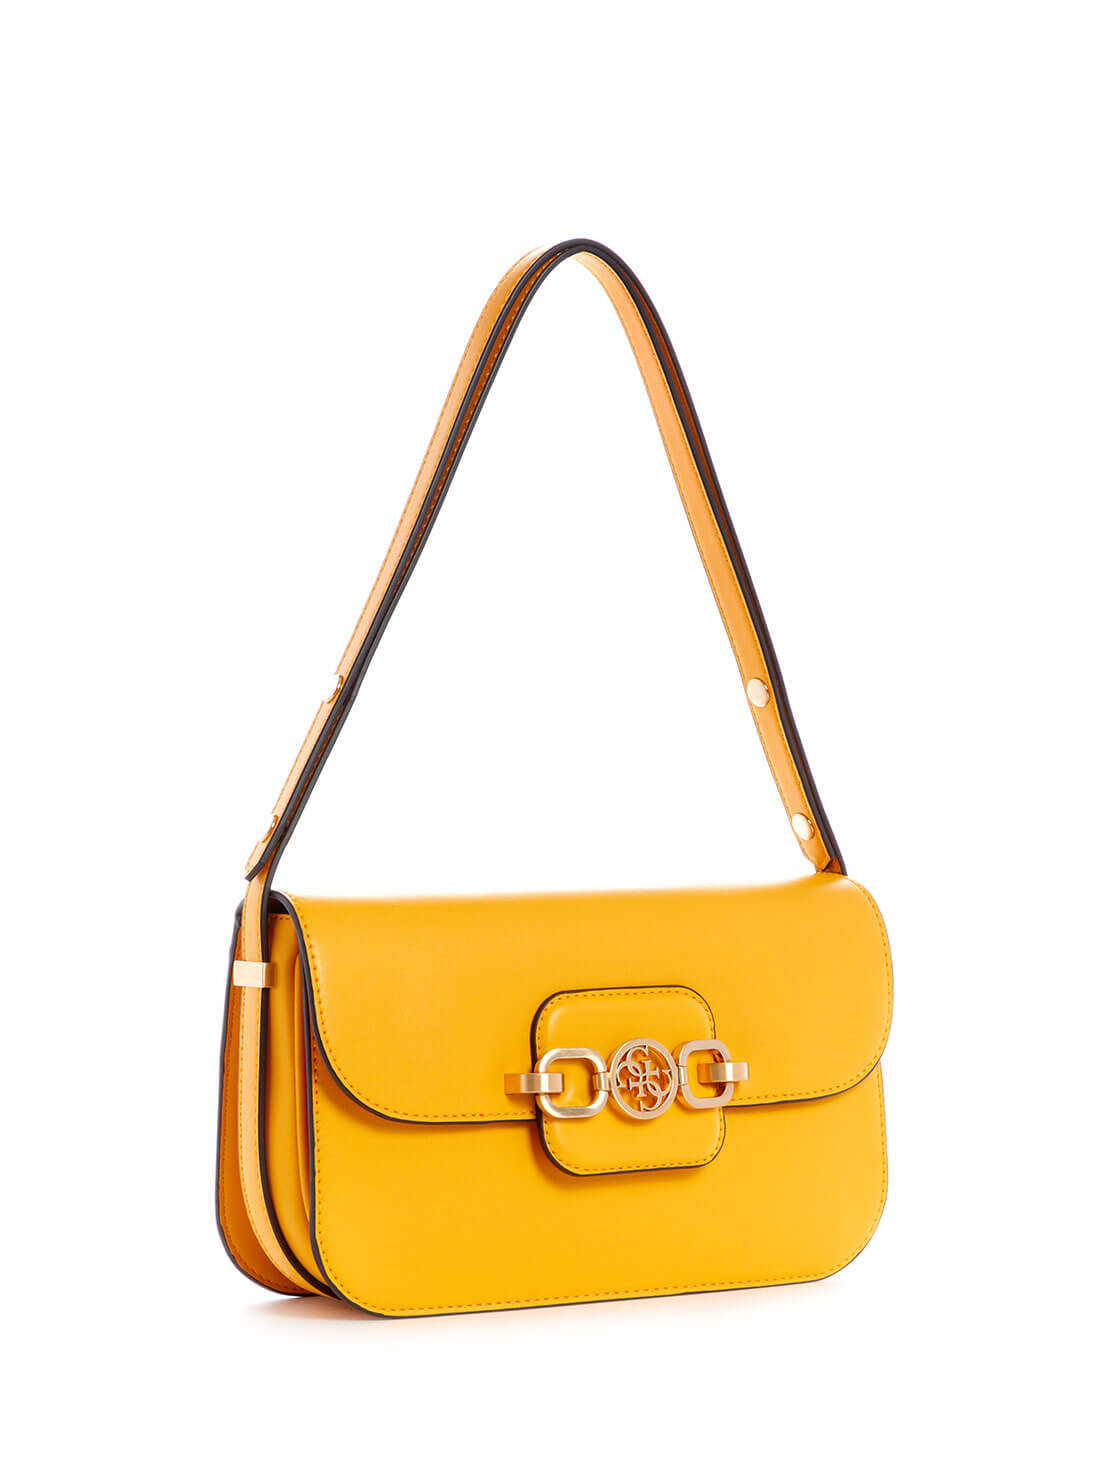 GUESS Womens Yellow Hensely Convertible Shoulder Bag VS811321 Side View